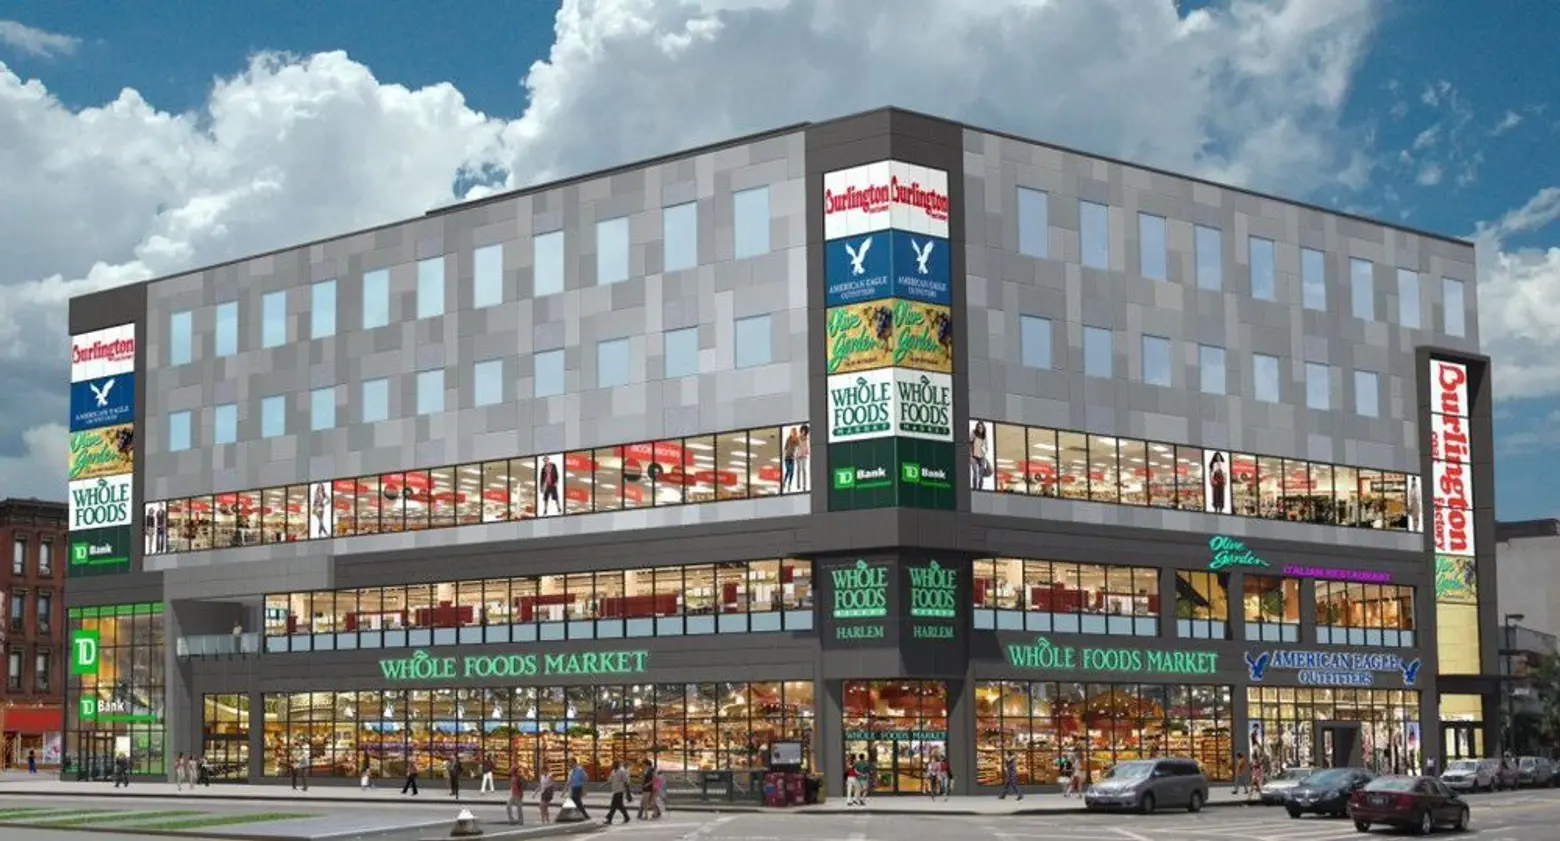 POLL: Will Whole Foods Drive Up Real Estate Values in Harlem?